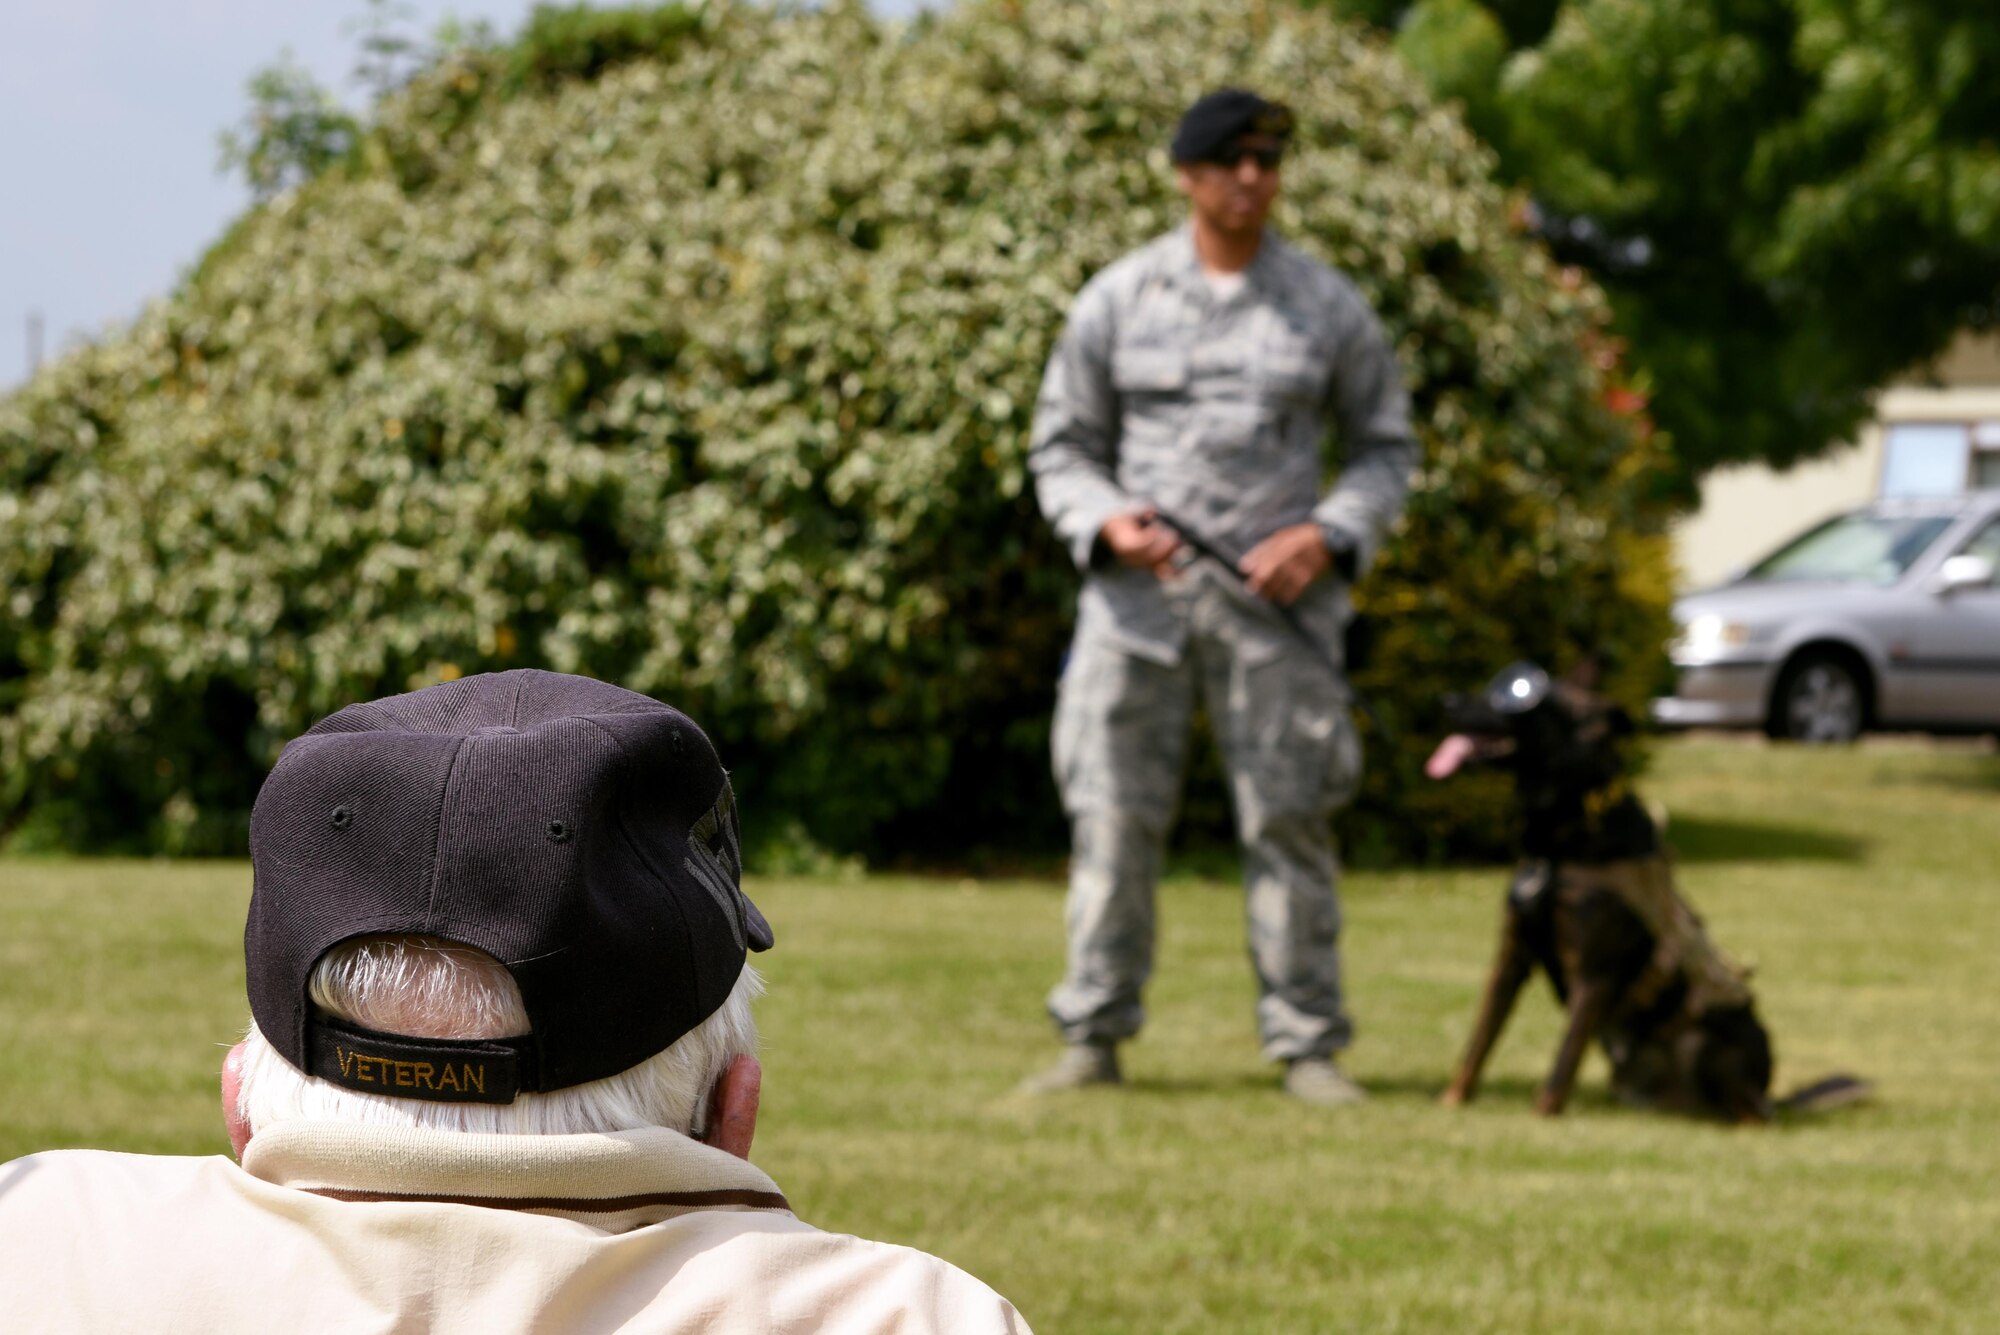 U.S. Air Force Staff Sgt. (retired) Doug Ward, a former mechanic from the 305th Bomb Group during World War II watches a Military Working Dog Demonstration at Royal Air Force Lakenheath, May 25. Ward joined the Army Air Corps as a mechanic in 1942 but volunteered as a B-17 Flying Fortress Ball Turret gunner on 37 missions. (U.S. Air Force photo/Airman 1st Class John A. Crawford)